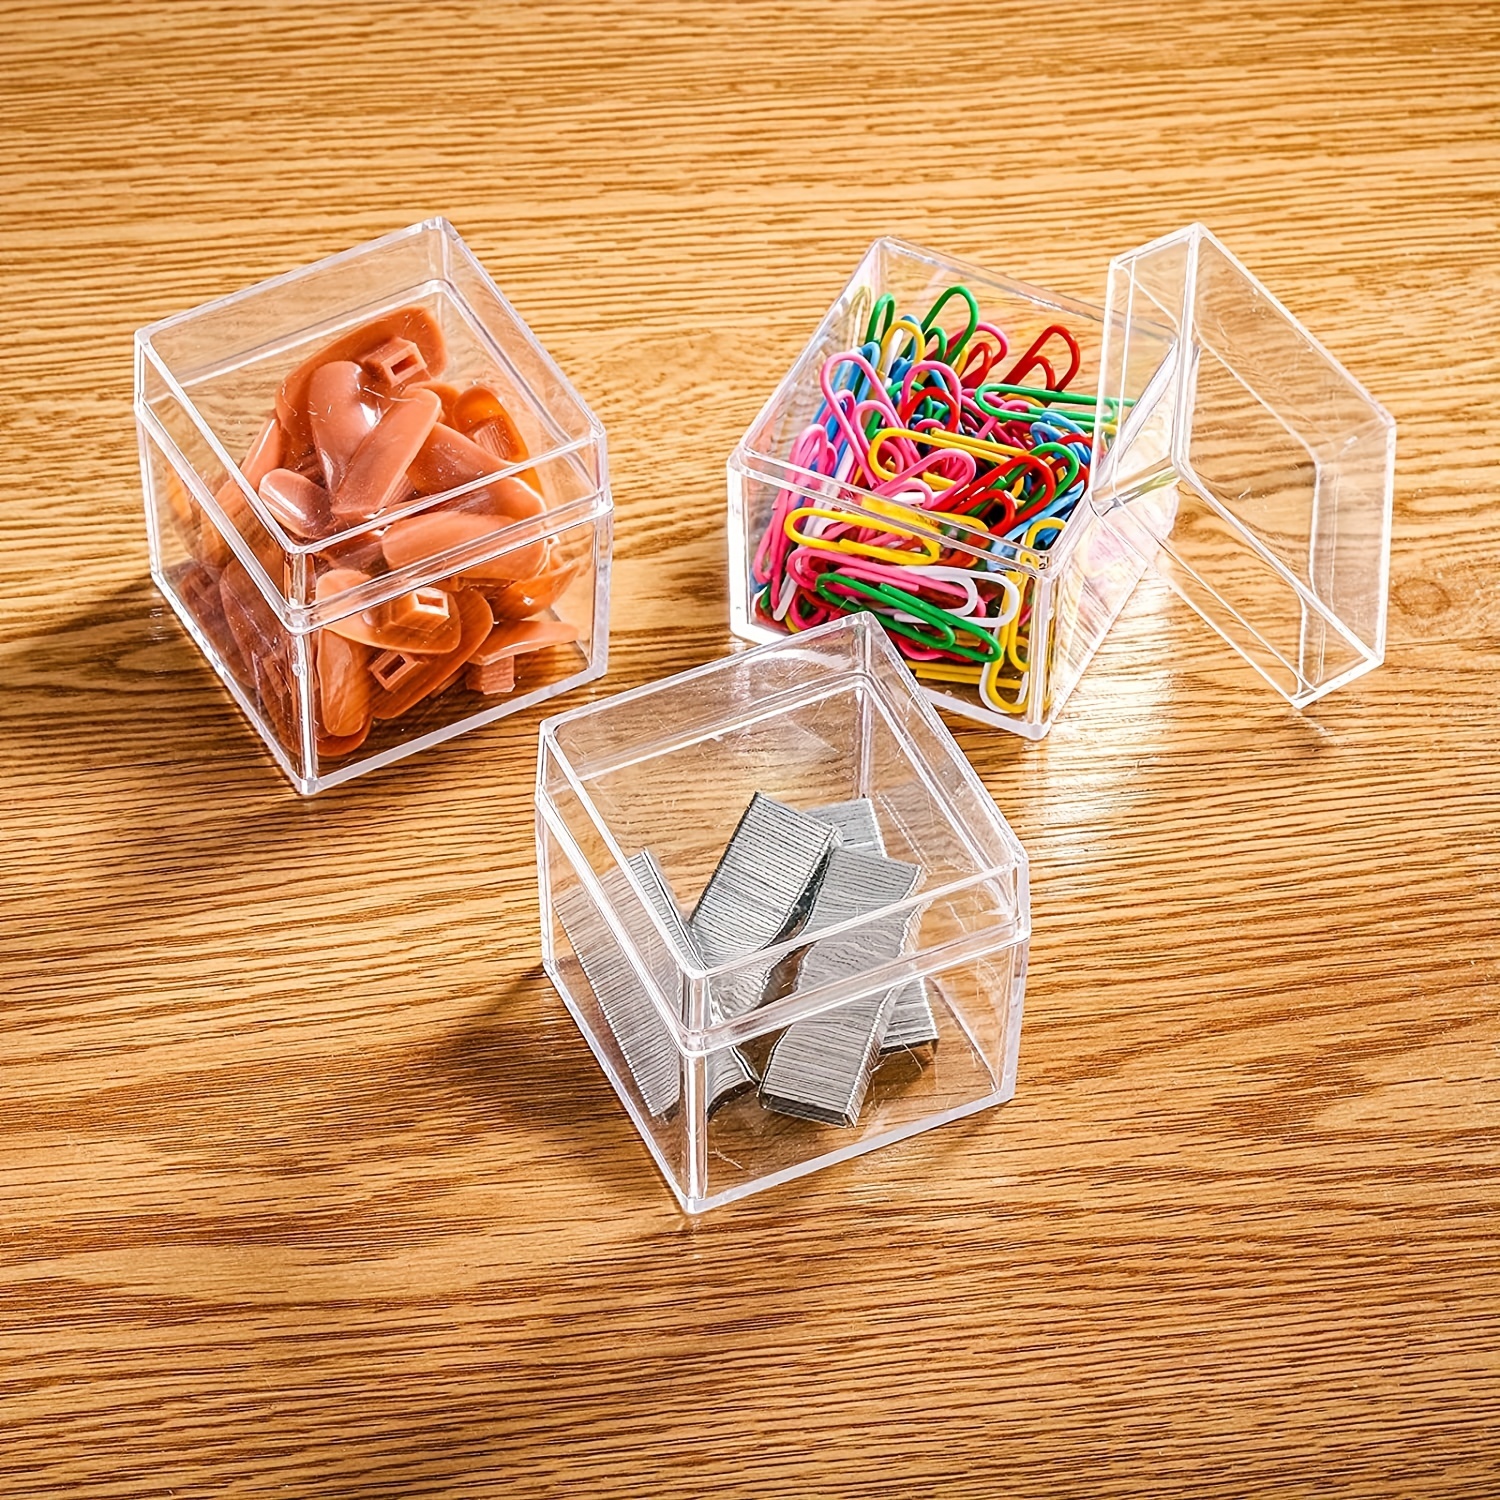 Hammont Clear Acrylic Boxes - 6 Pack - 2.25''x2.25''x2.25'' - Small Cube  Lucite Boxes for Gifts, Weddings, Party Favors, Treats, Candies 